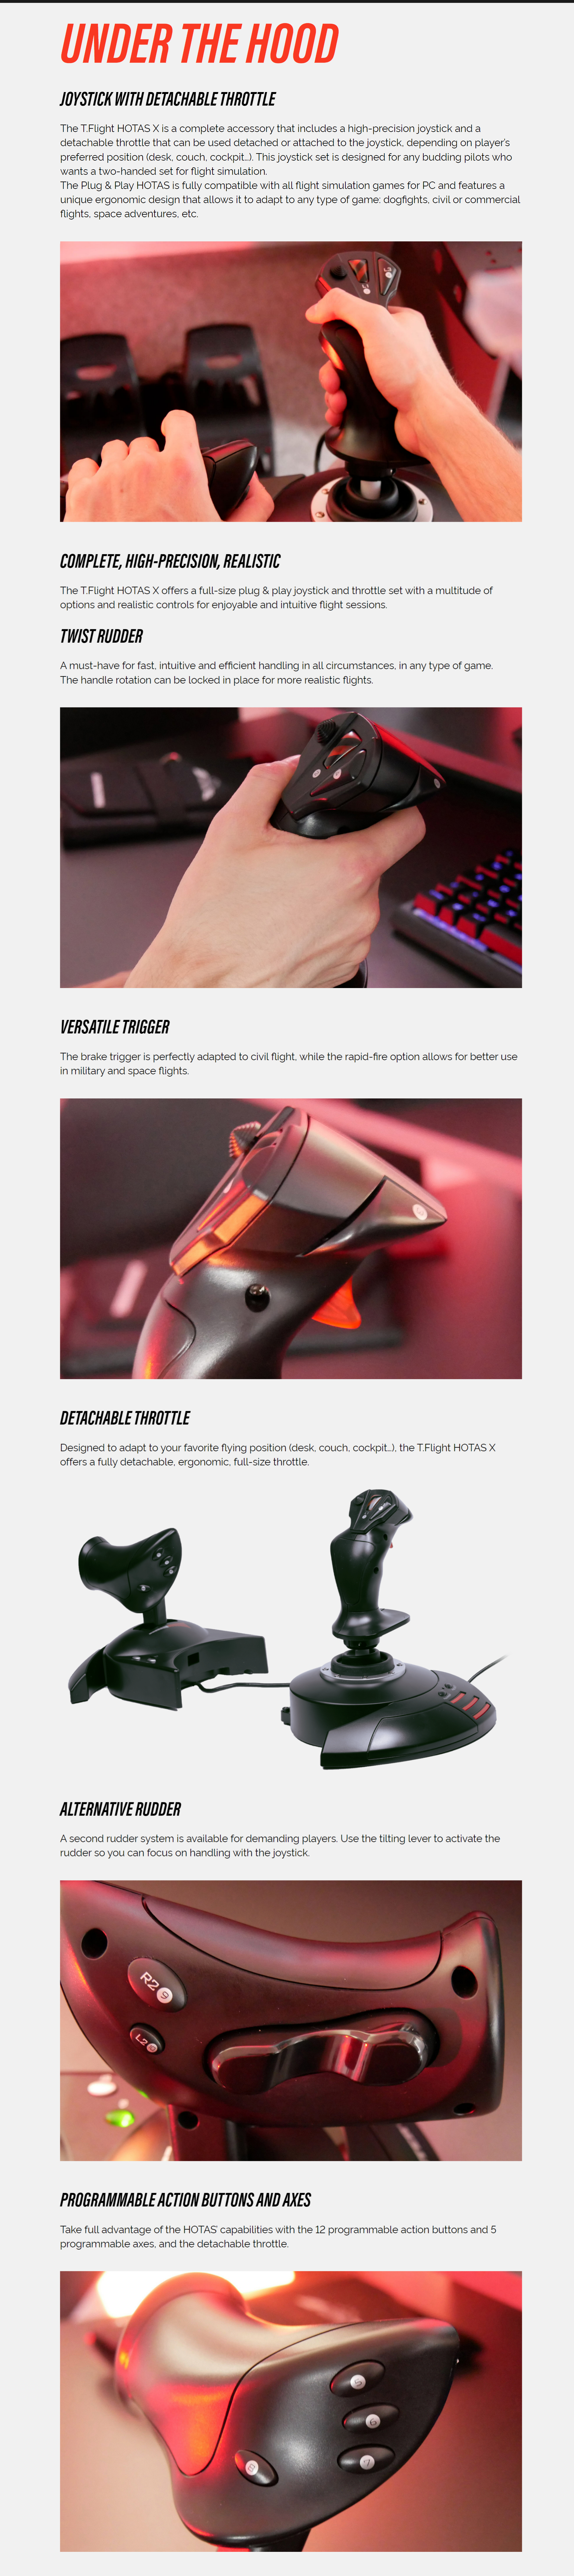 Thrustmaster T.Flight Stick X - USB Joystick for PC and PS3